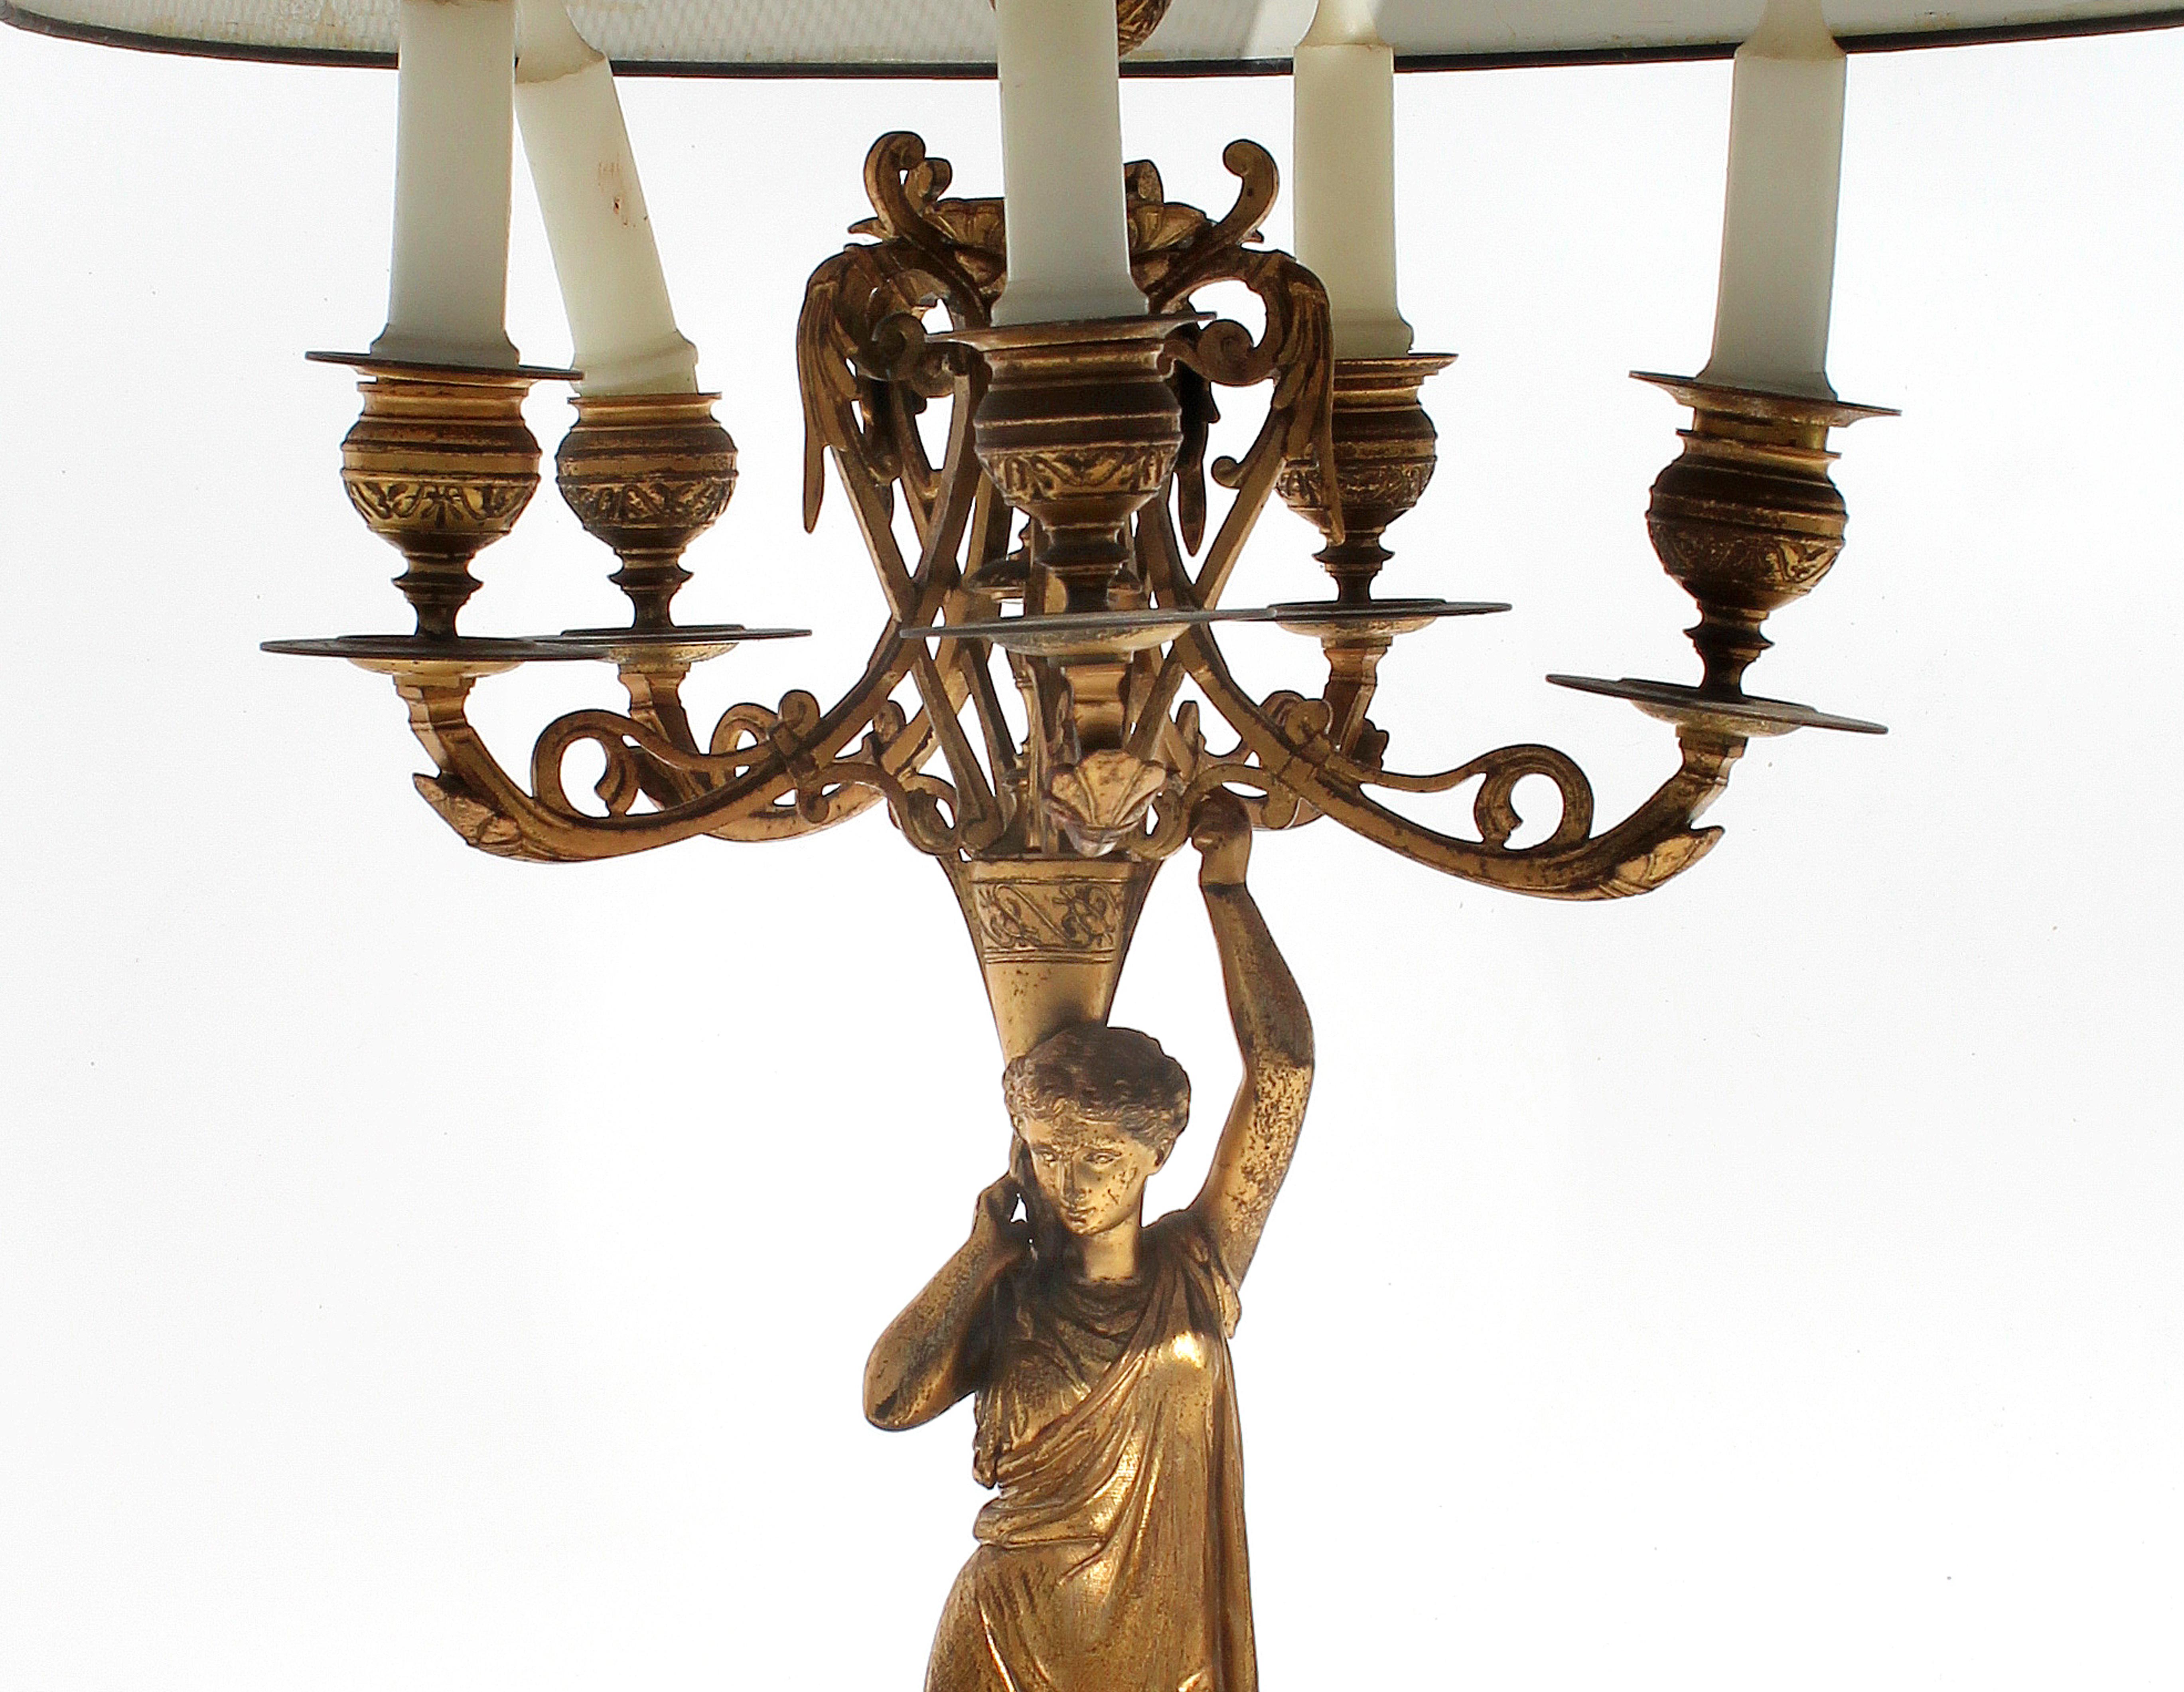 Neoclassical Revival French 19th Century Bronze Doré and Marble Figural Candelabra, Mounted as a Lamp